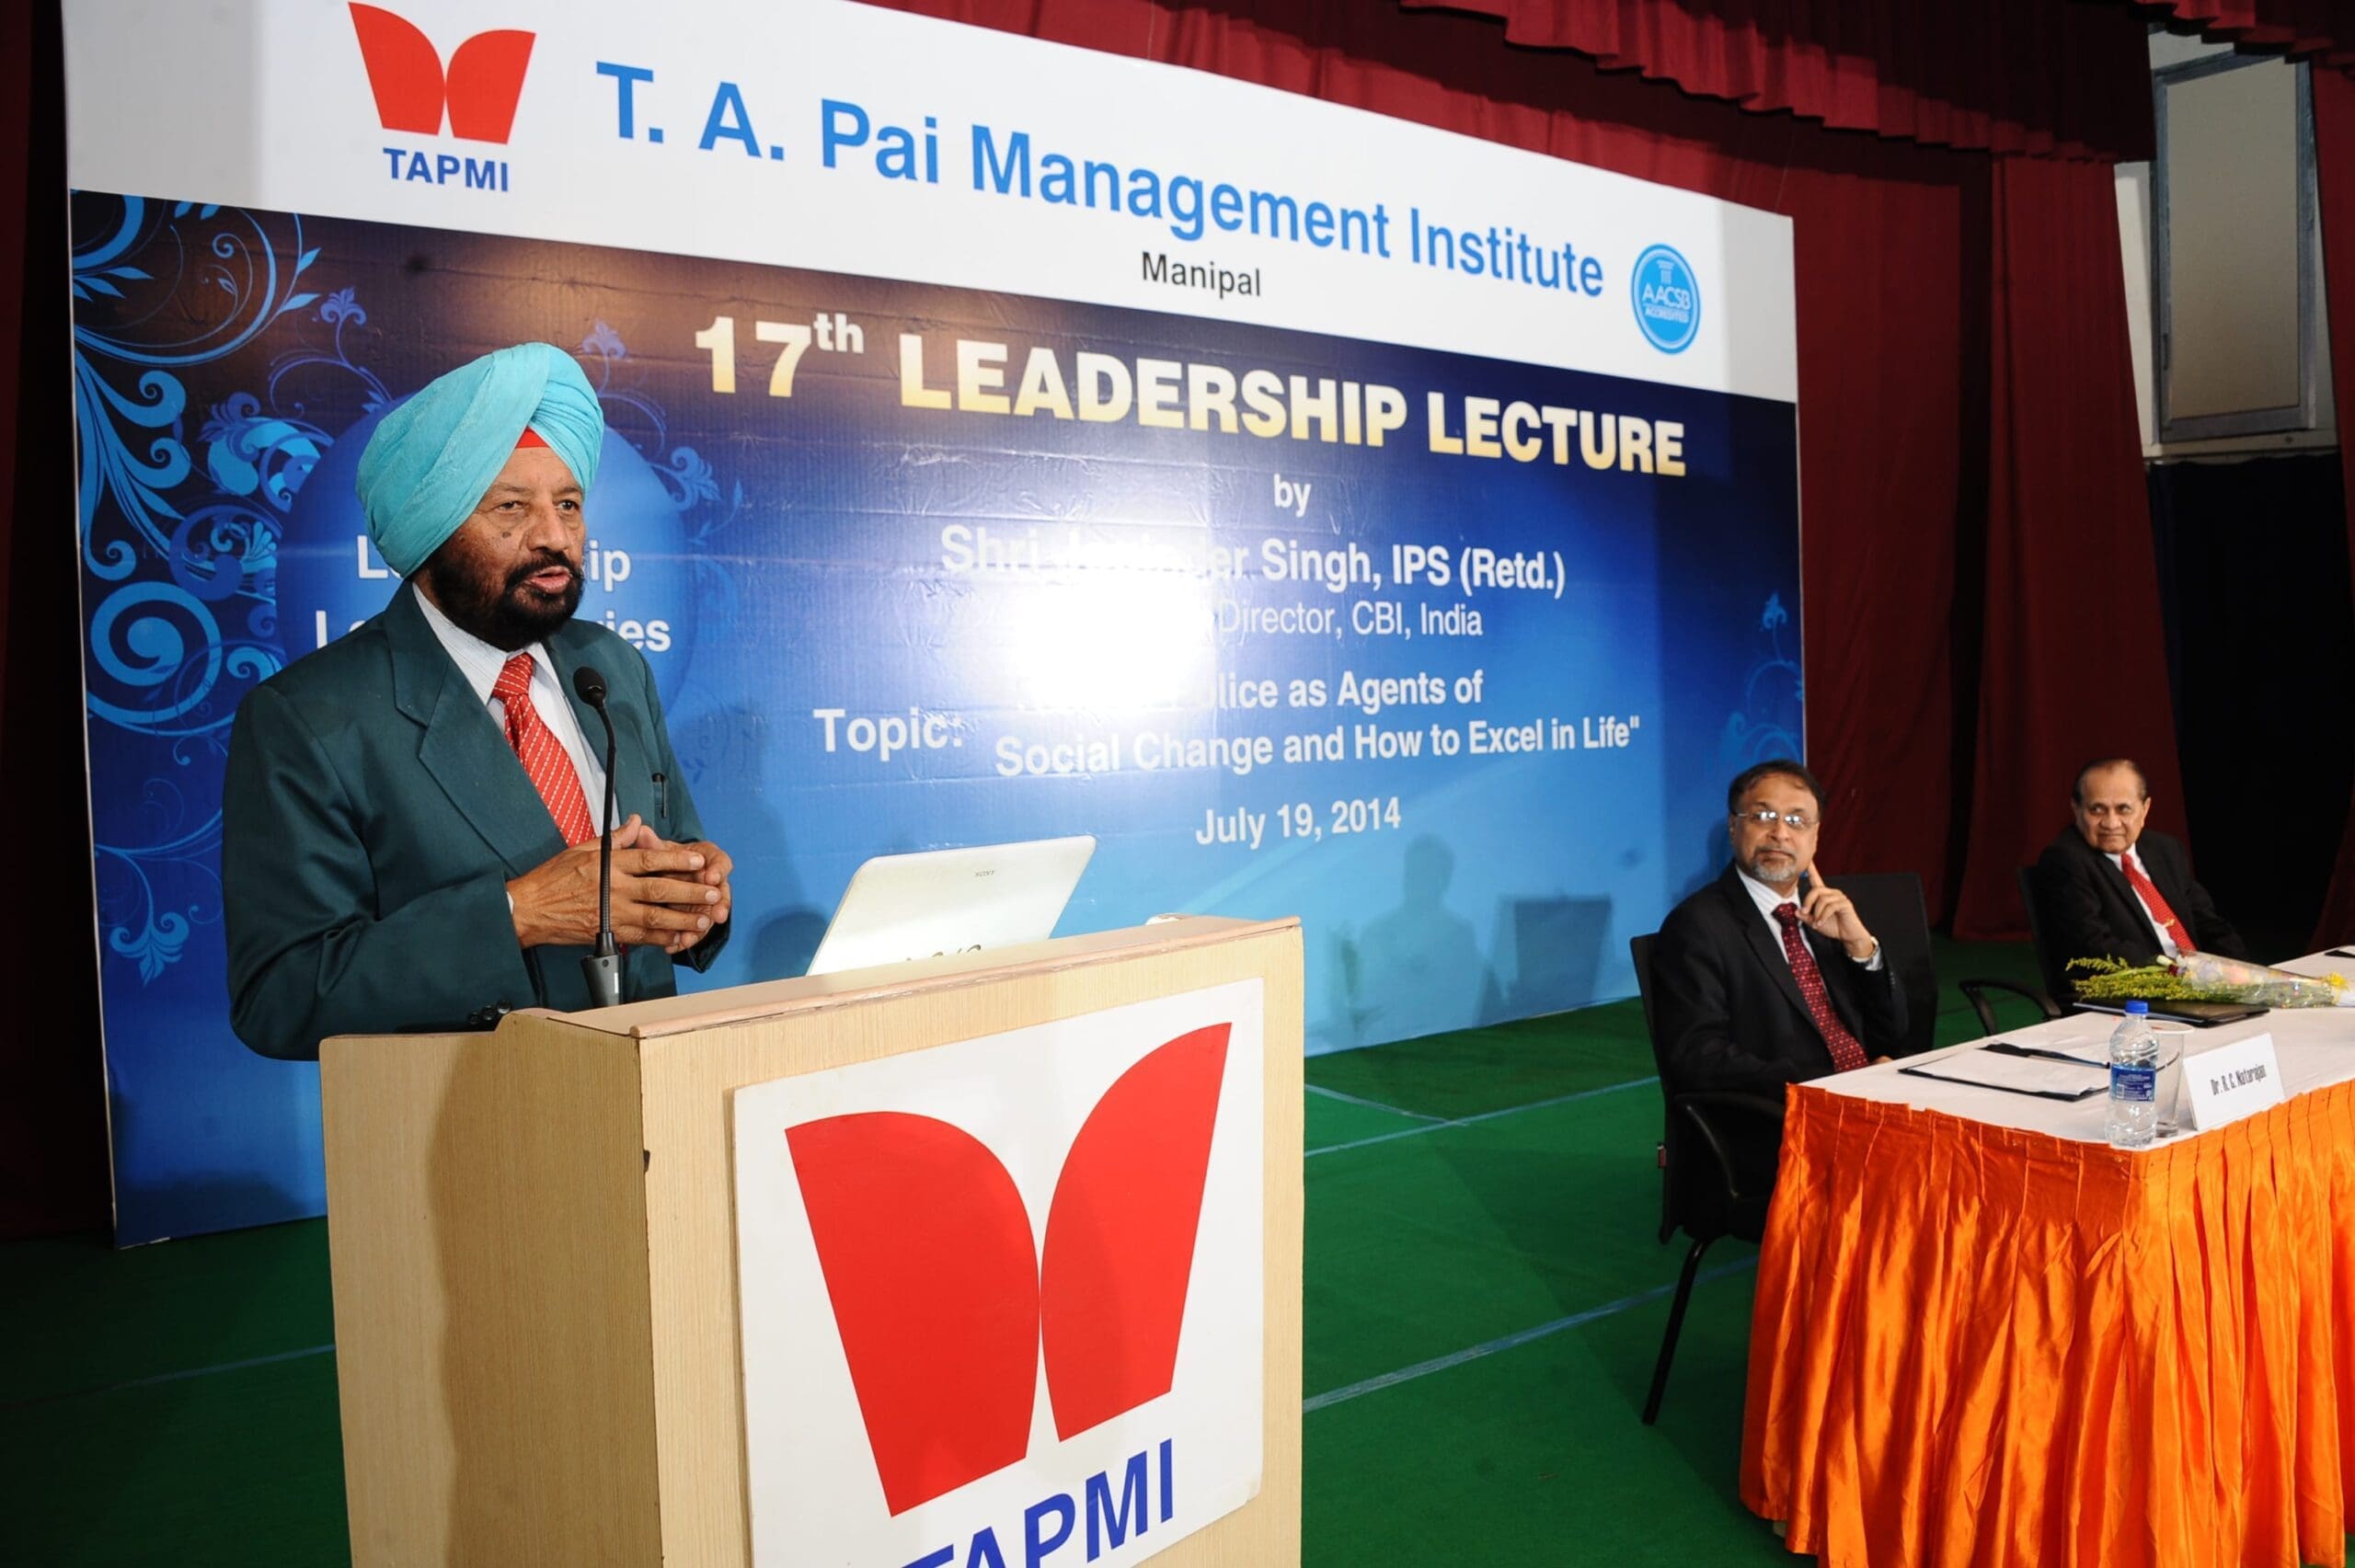 Leadership lecture TAPMI